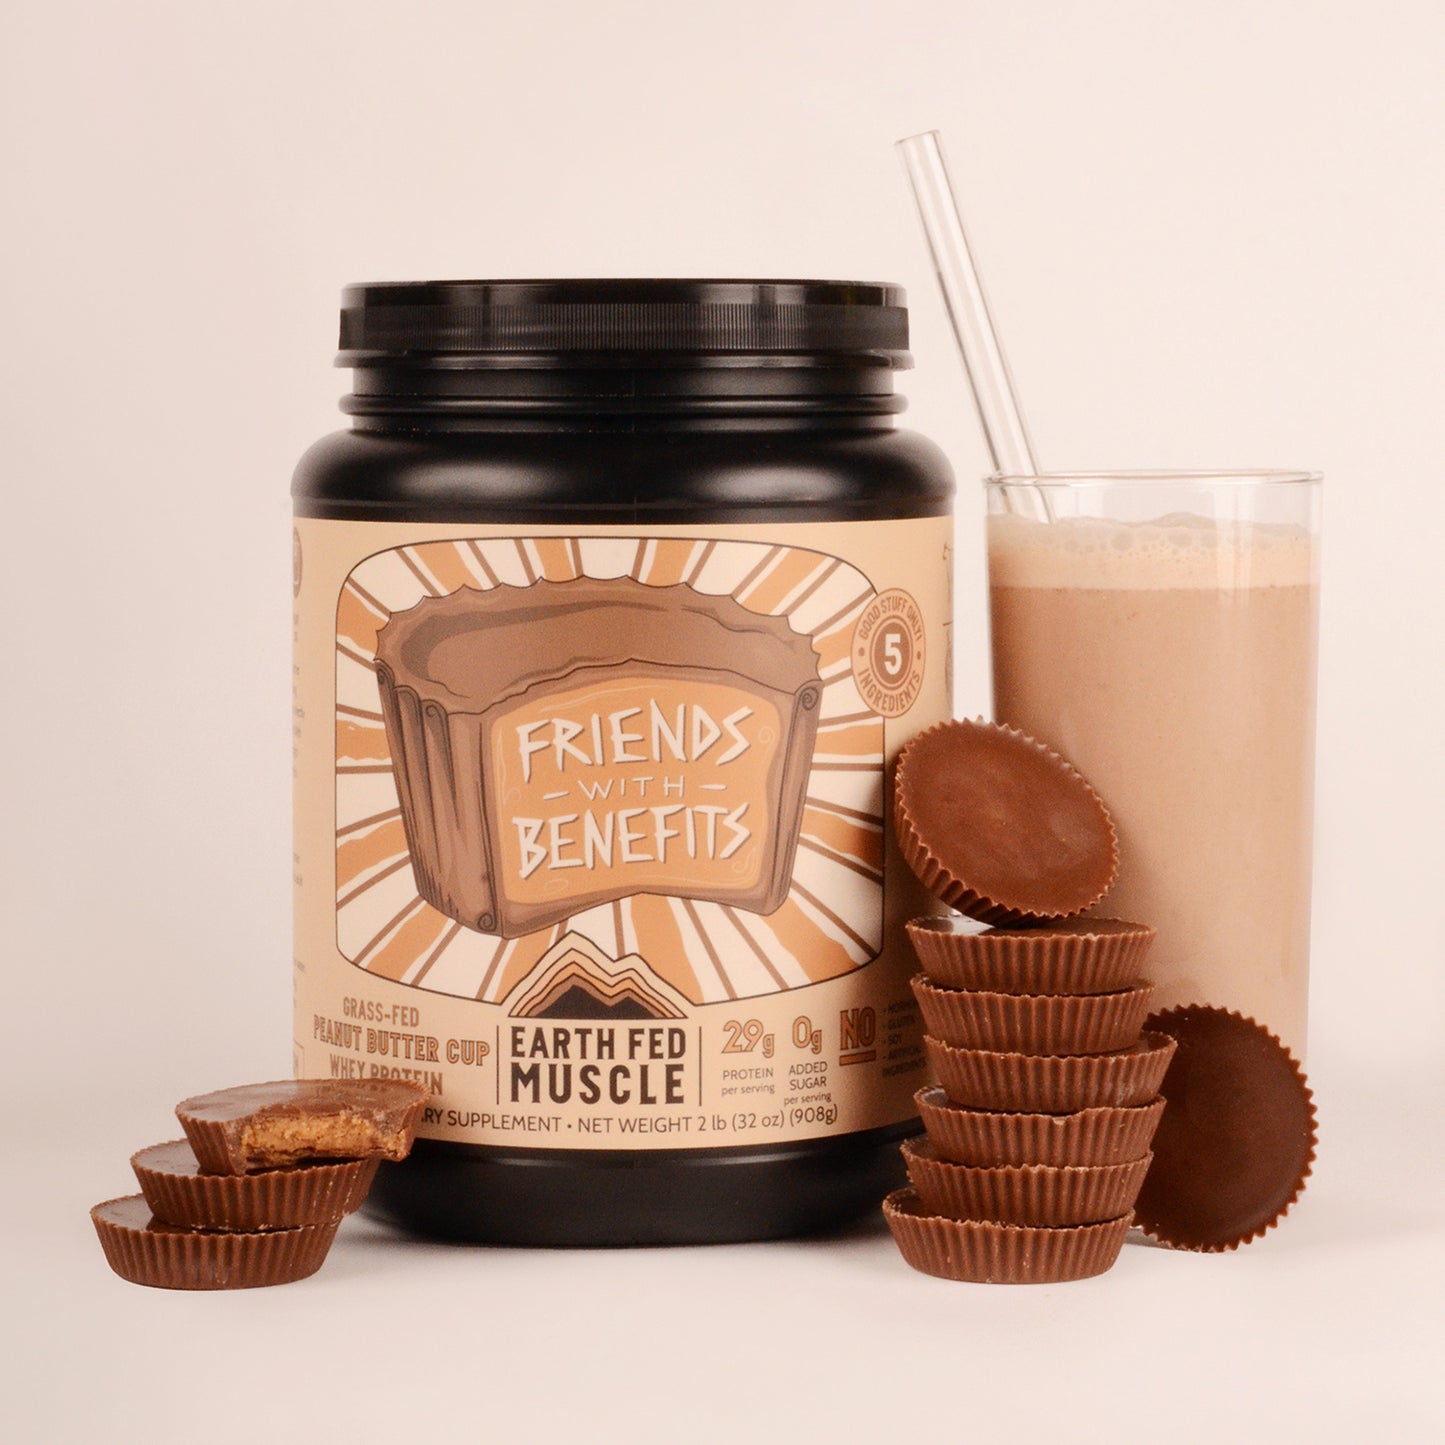 Friends with Benefits Peanut Butter Cup Grass Fed Protein